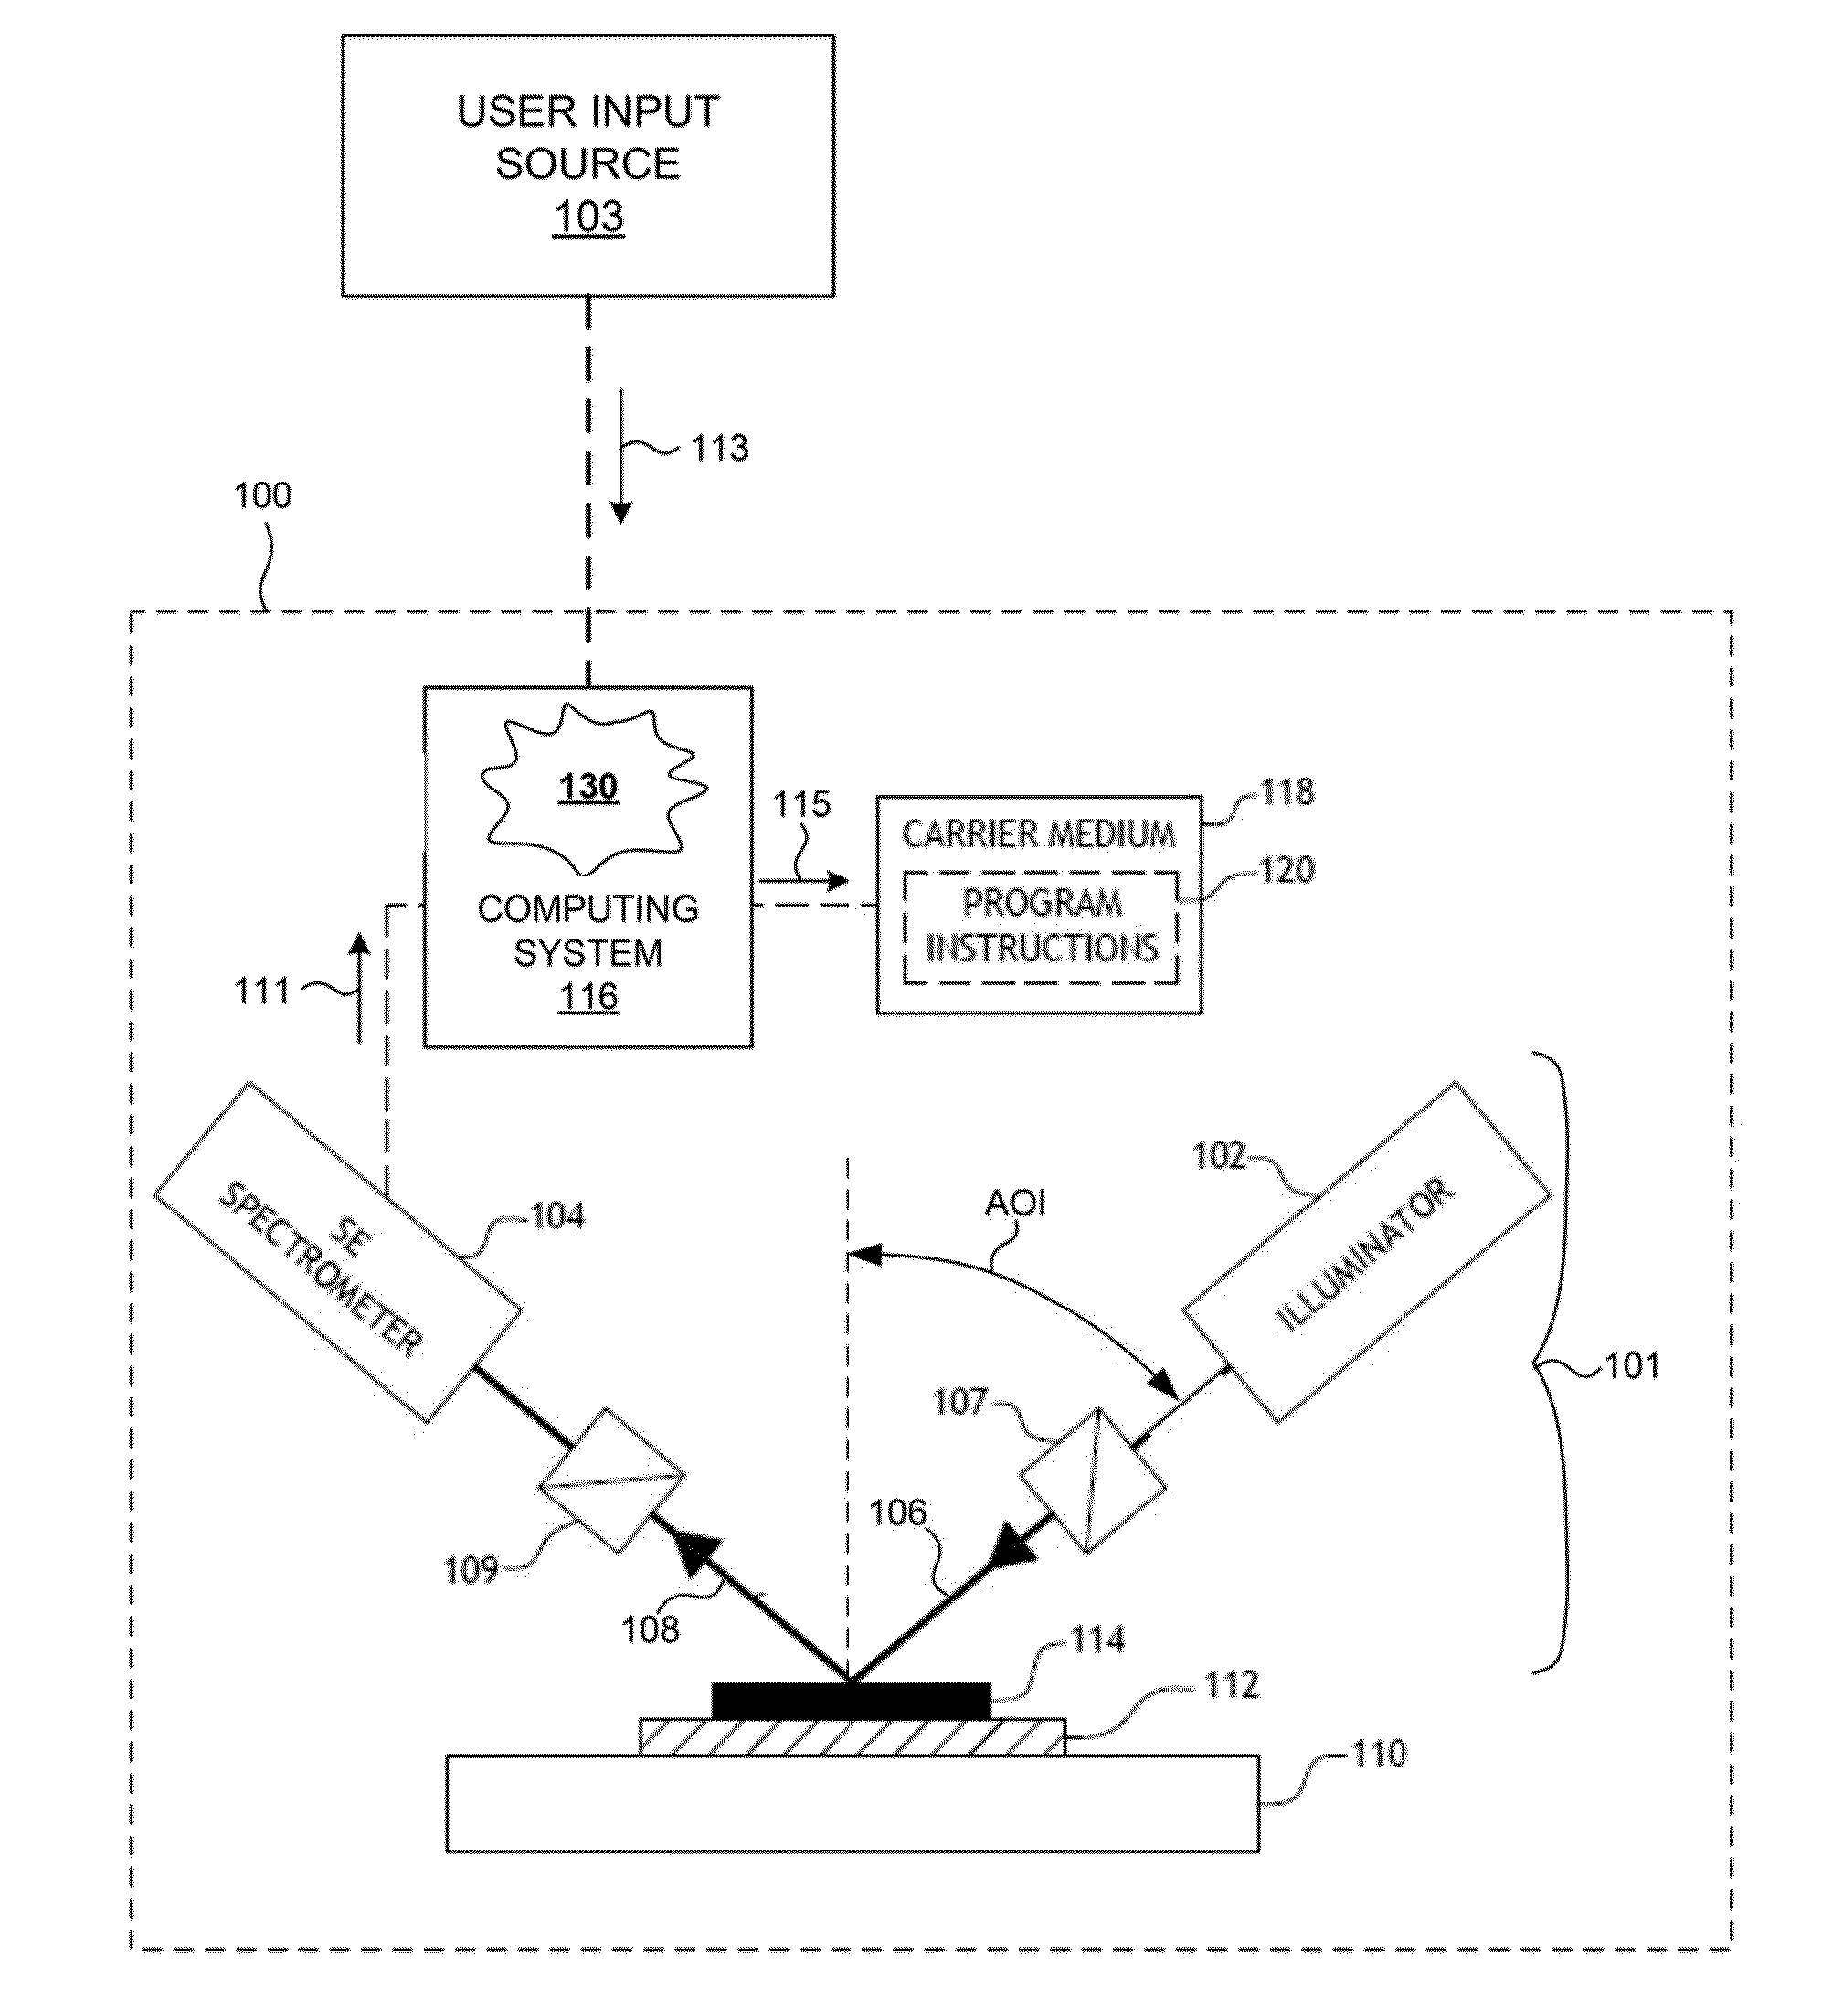 Semiconductor Device Models Including Re-Usable Sub-Structures